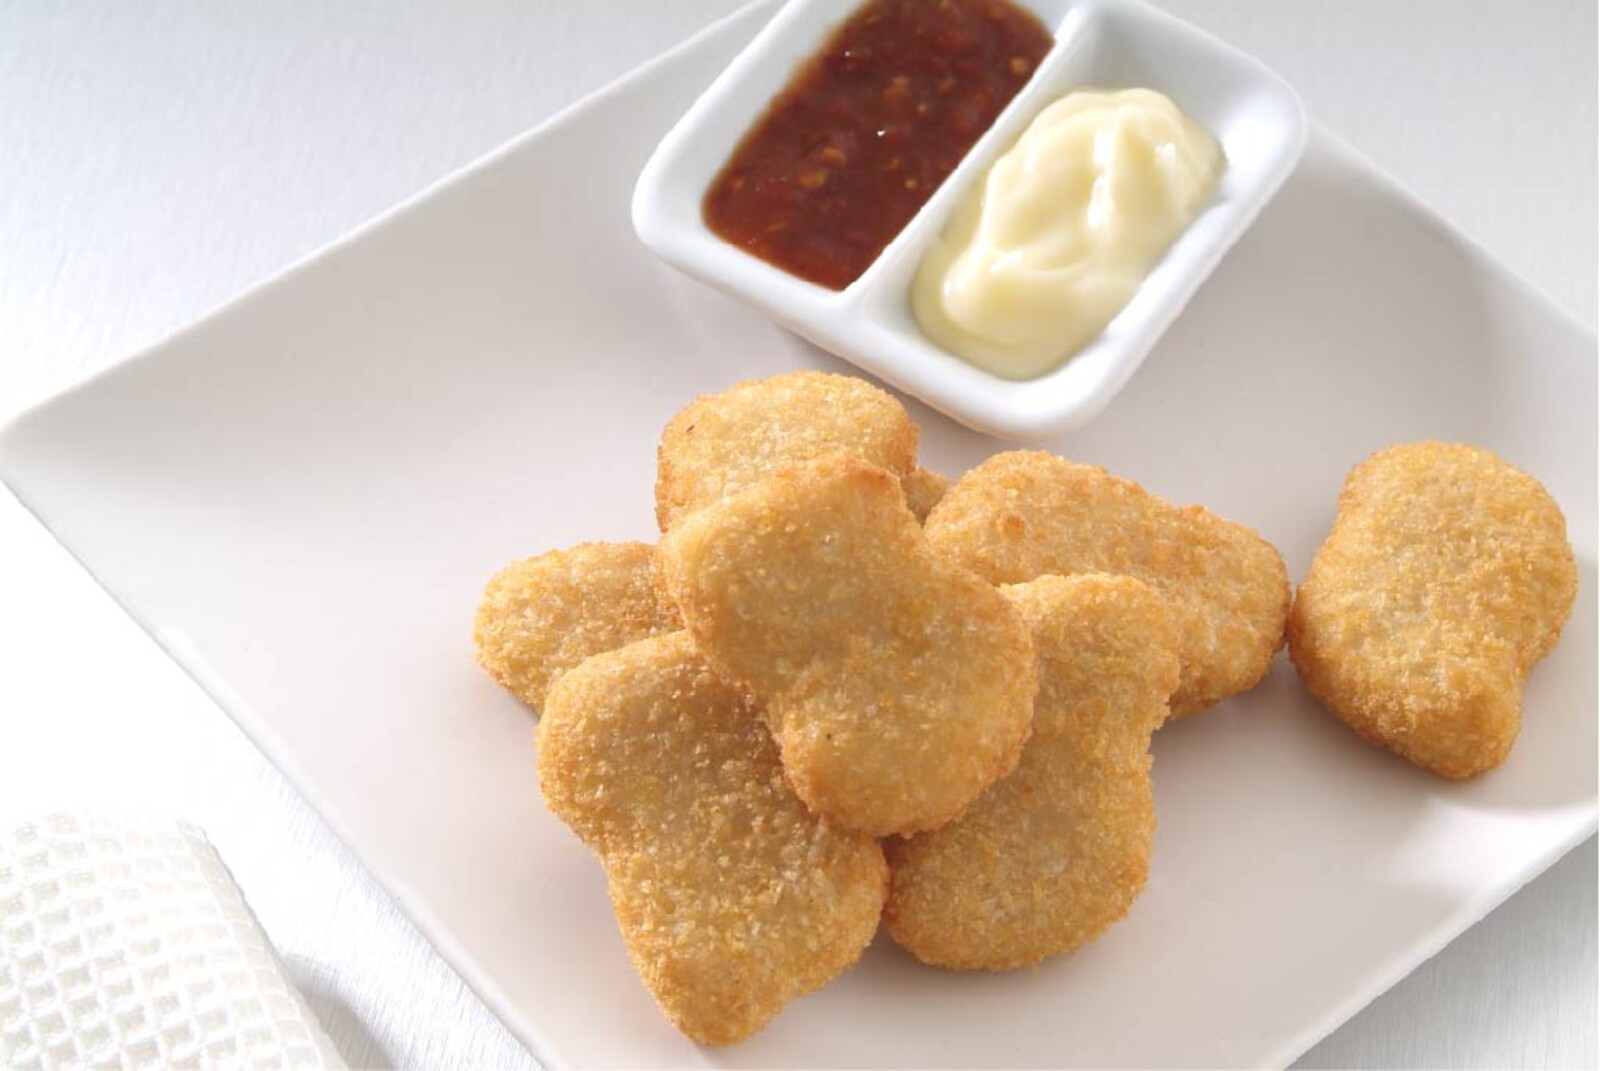 Cavos Products Crumbed Chicken Breast Nuggets